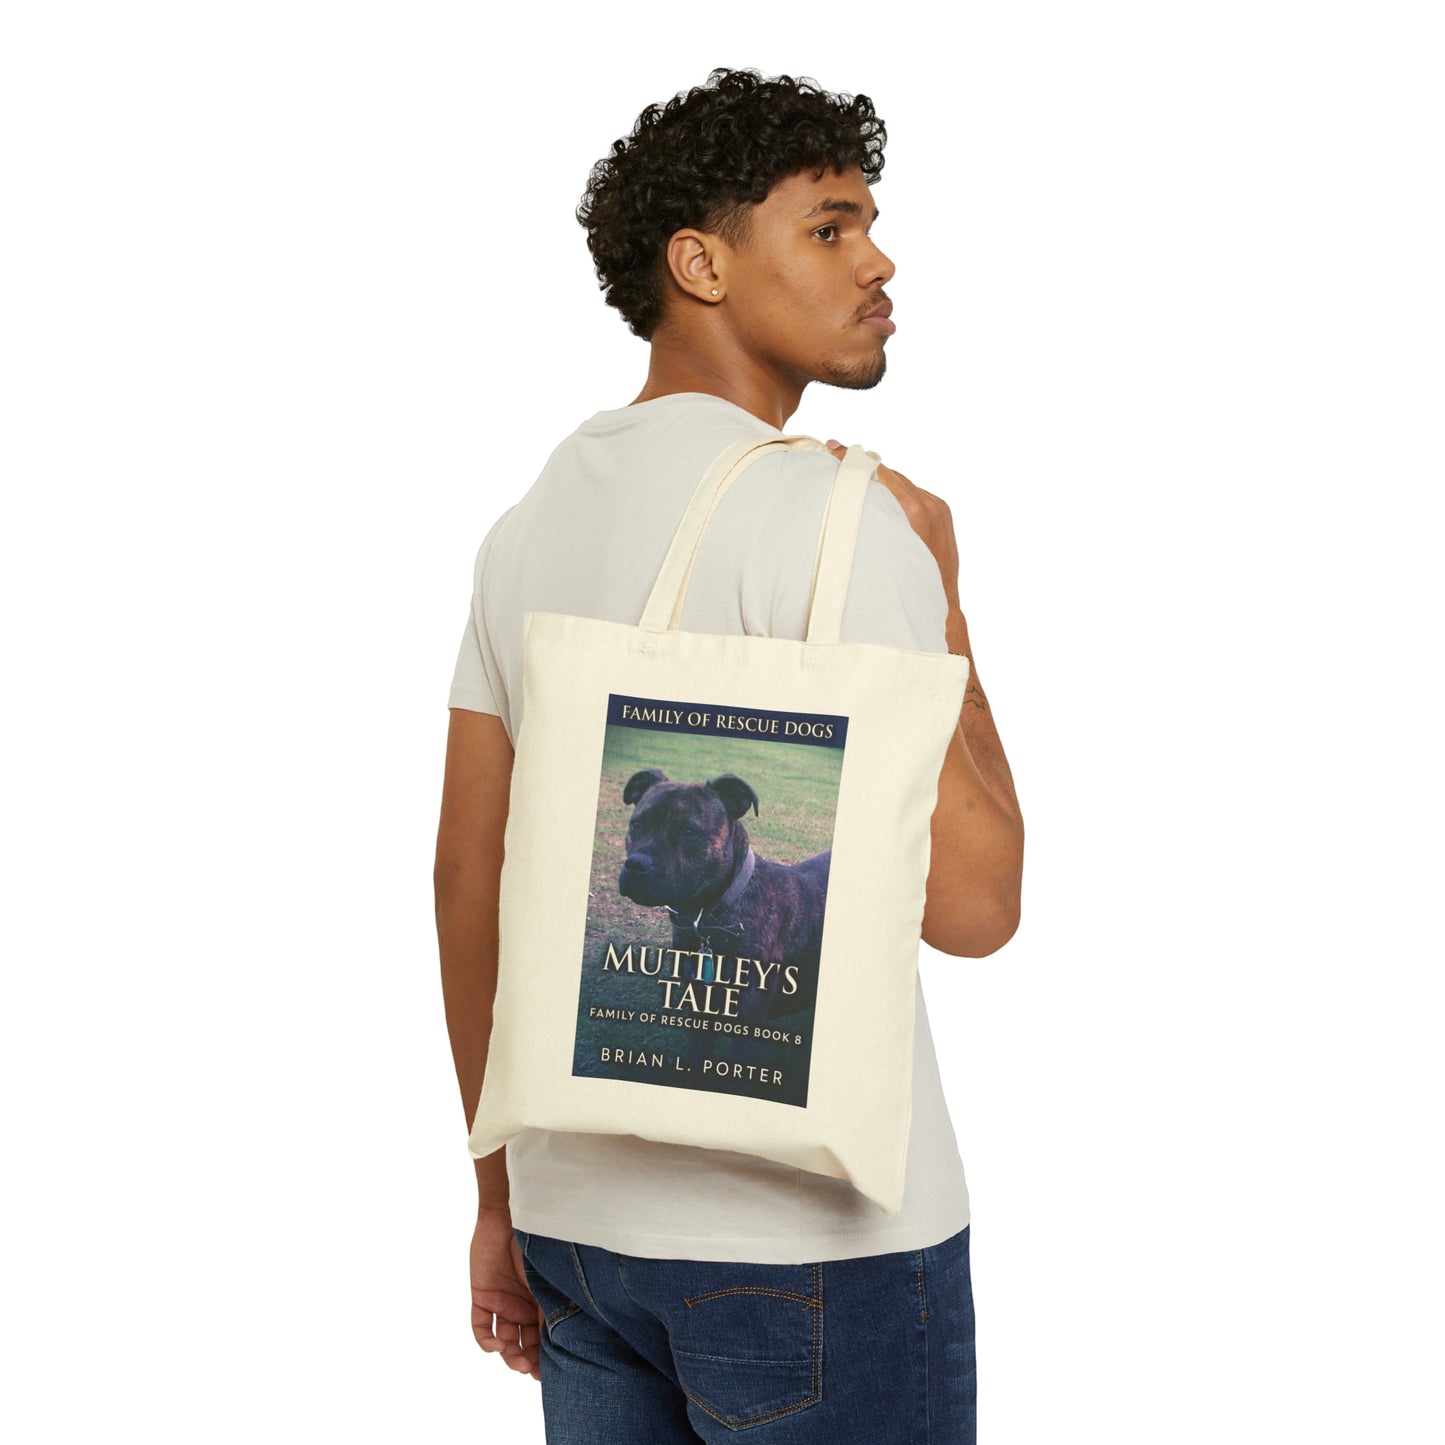 Muttley's Tale - Cotton Canvas Tote Bag